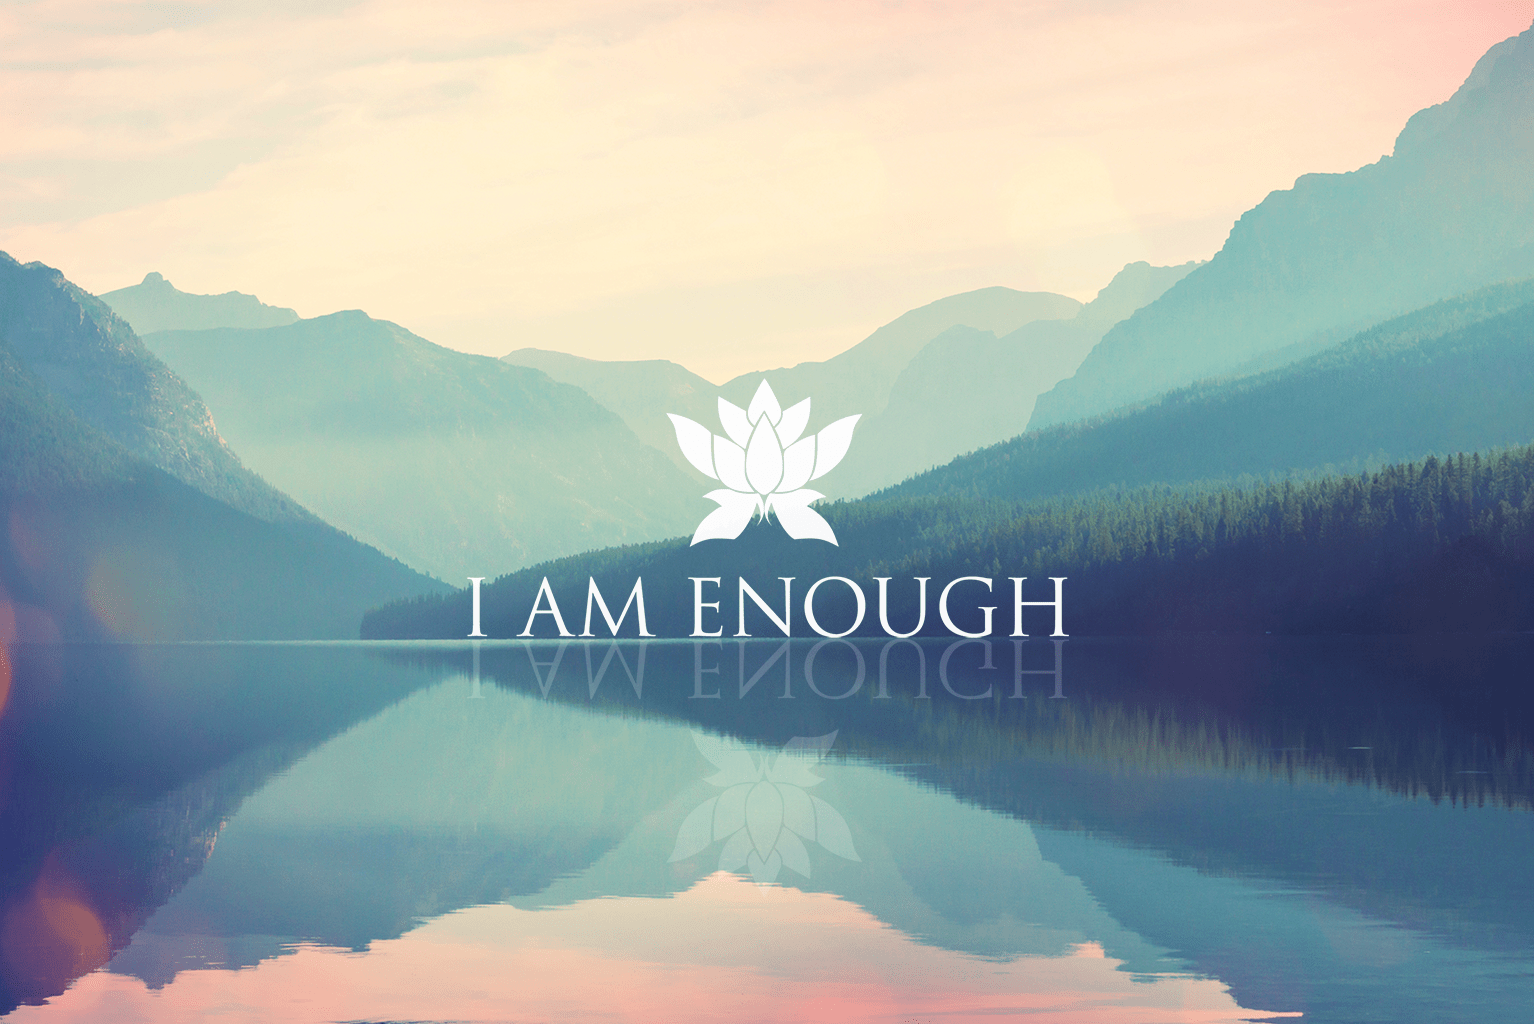 Action for Happiness on X Remind yourself I am enough Image  httpstcoKN9gAsyZSr httpstcocE9Tr4sAmb  X